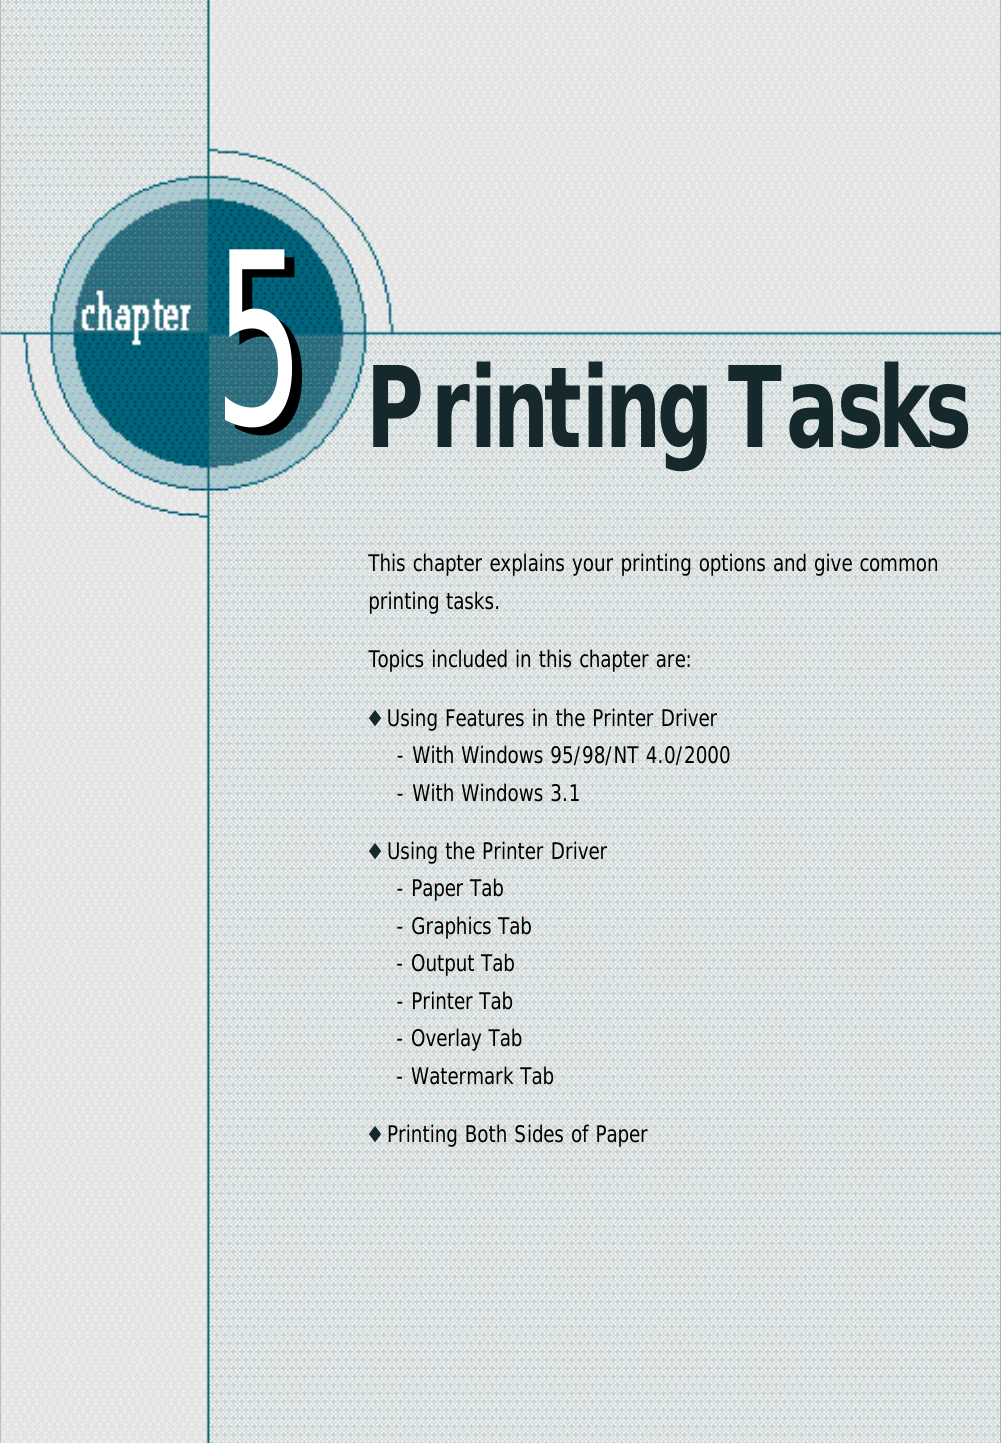 Printing Tasks55This chapter explains your printing options and give commonprinting tasks.Topics included in this chapter are:◆Using Features in the Printer Driver- With Windows 95/98/NT 4.0/2000- With Windows 3.1◆Using the Printer Driver- Paper Tab- Graphics Tab- Output Tab- Printer Tab- Overlay Tab- Watermark Tab◆Printing Both Sides of Paper 